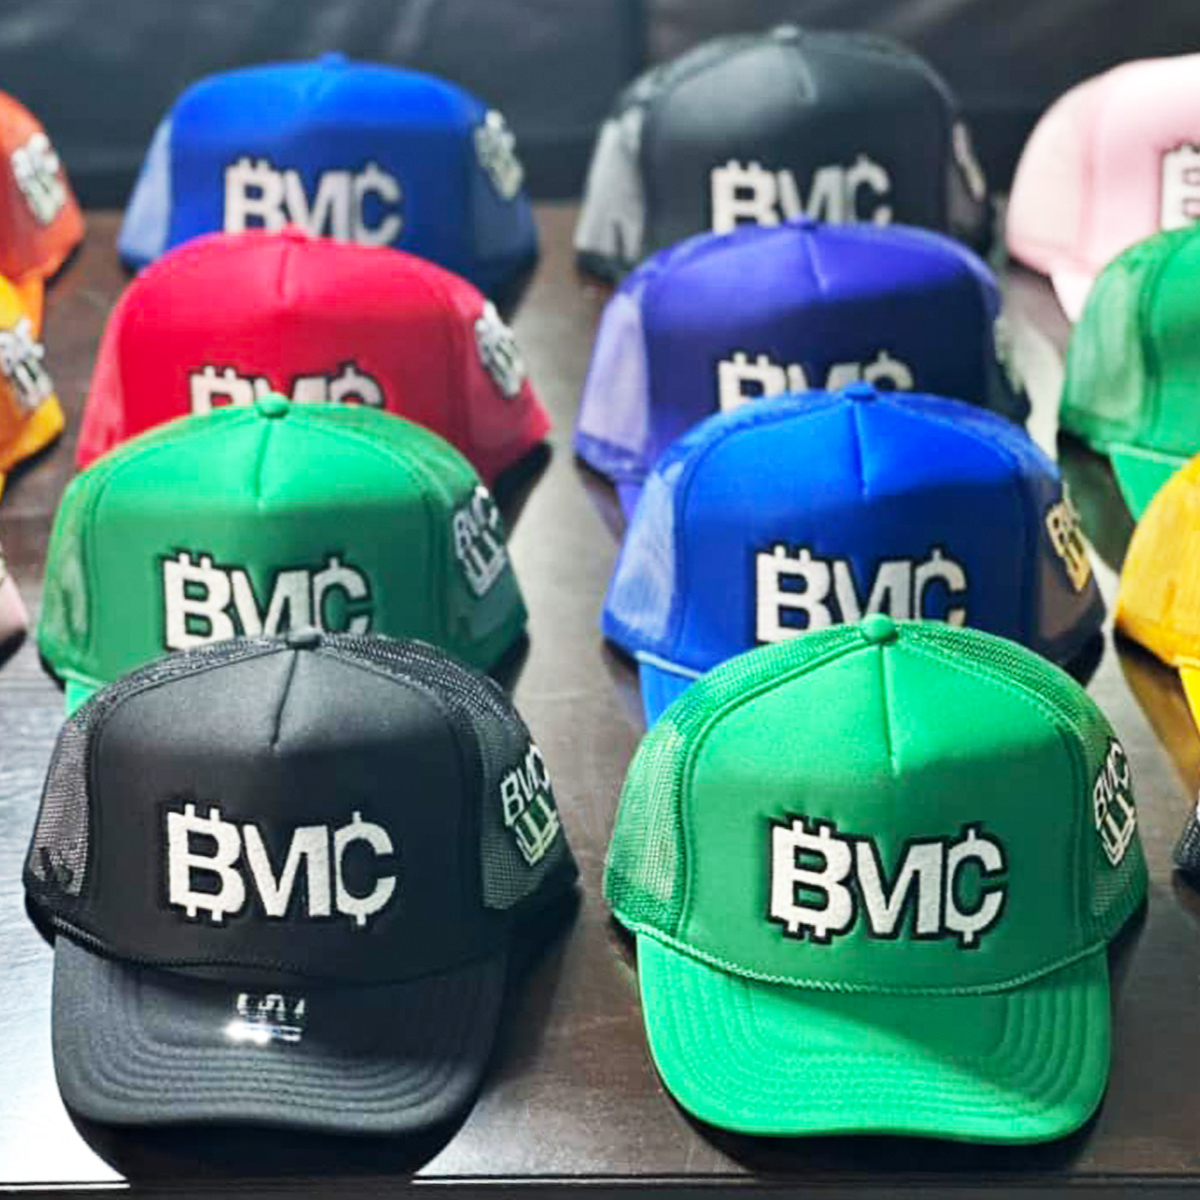 From bold logos to intricate designs, our customers are taking their projects to the next level! Share your embroidered cap masterpieces with us. 💫 #EmbroideryArt #CustomerWork  
.
Eliud Castellanos  
.
.
.
 #Embroidery #CustomApparel #Entrepreneurs #Ricoma #Caps #Embroidery